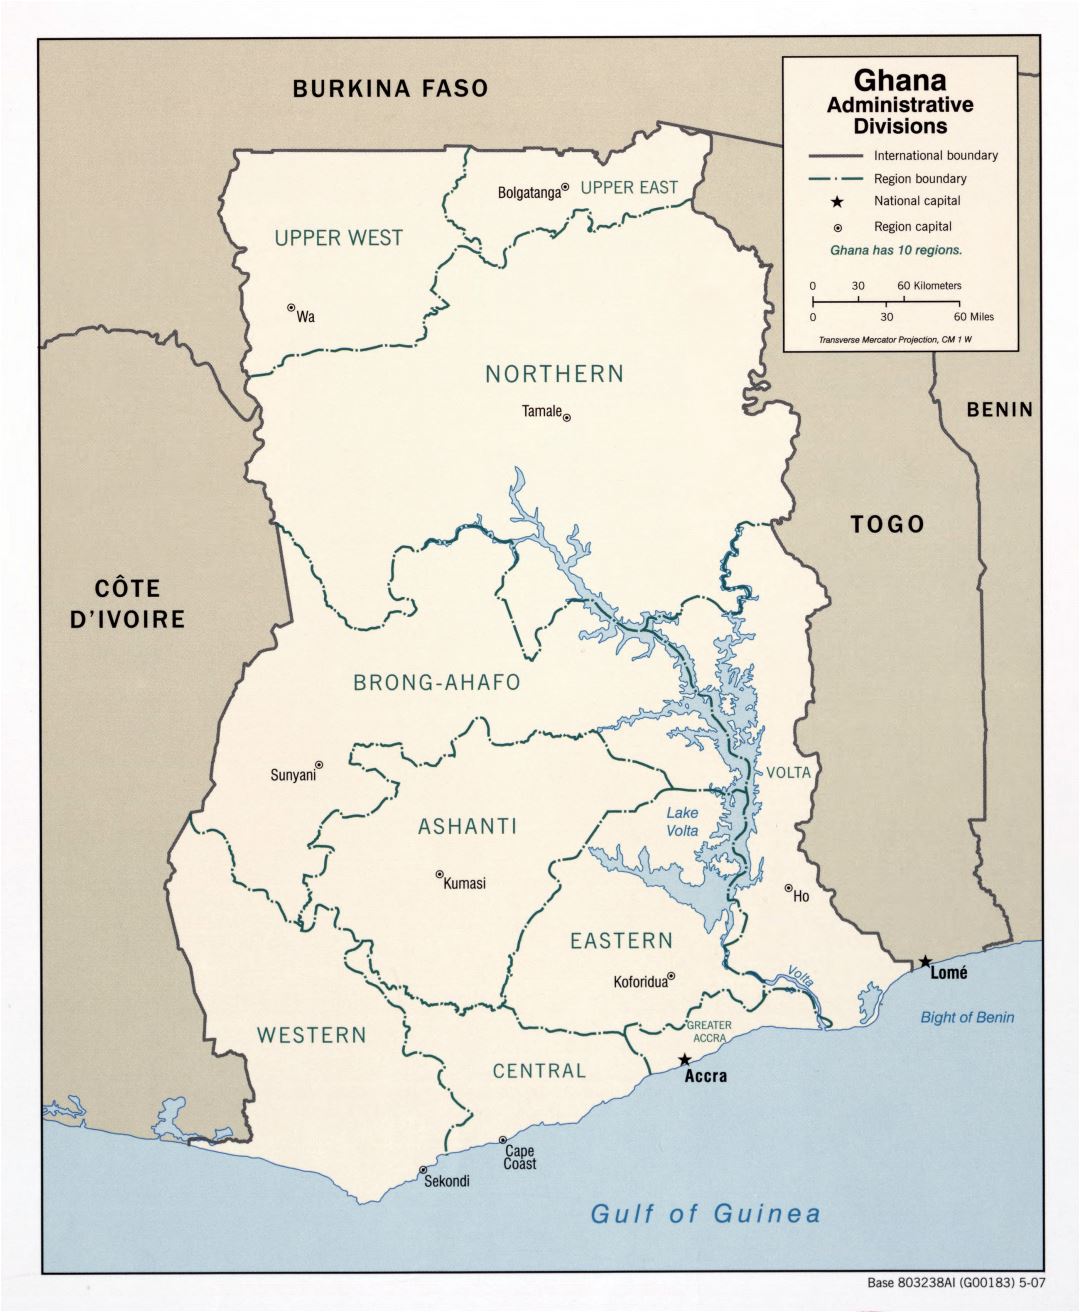 Large detailed administrative divisions map of Ghana - 2007